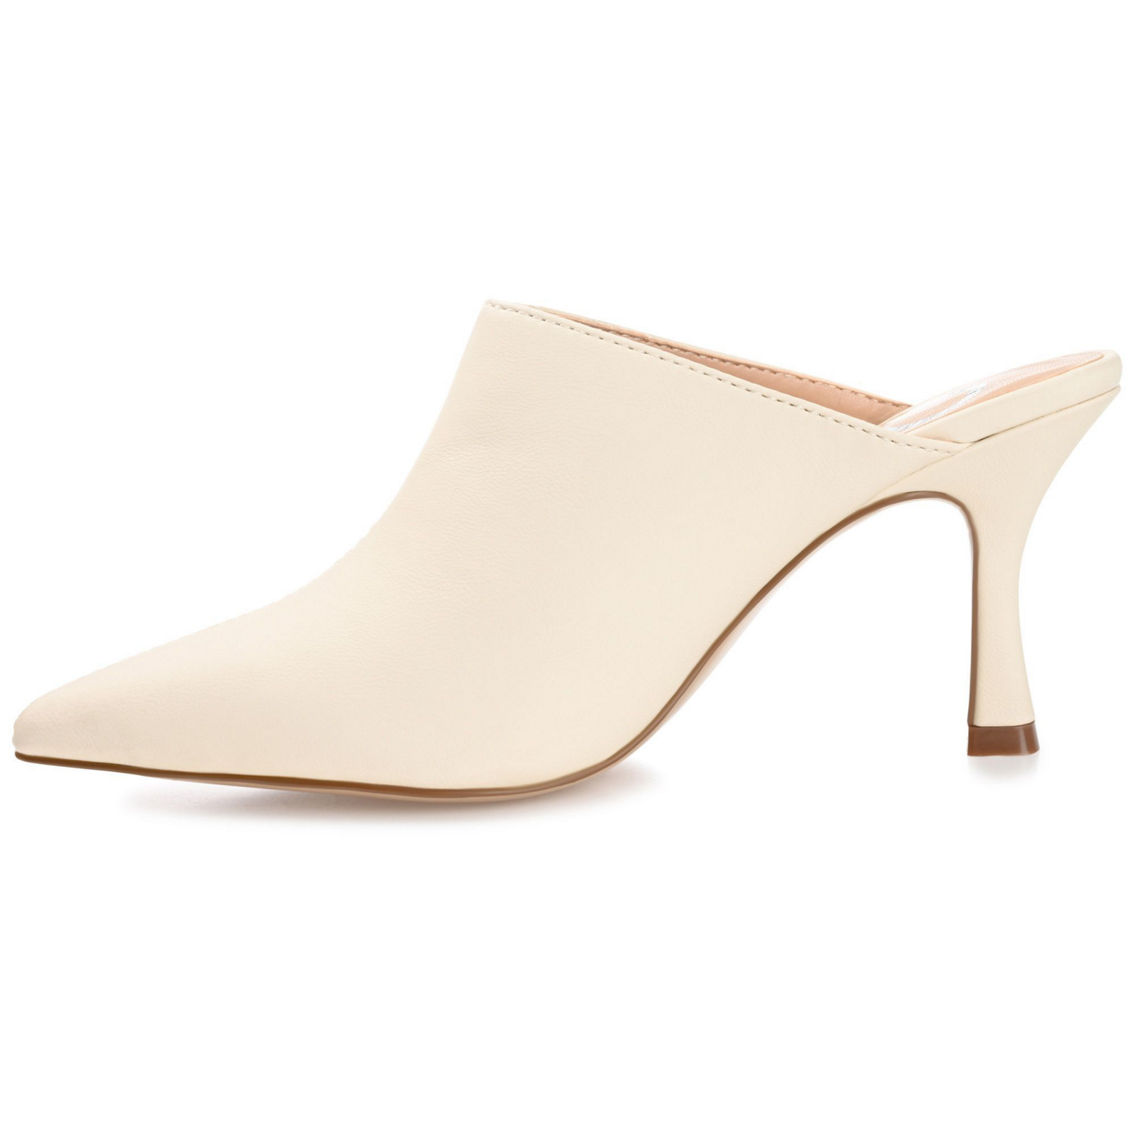 Journee Collection Women's Shiyza Pump - Image 4 of 5